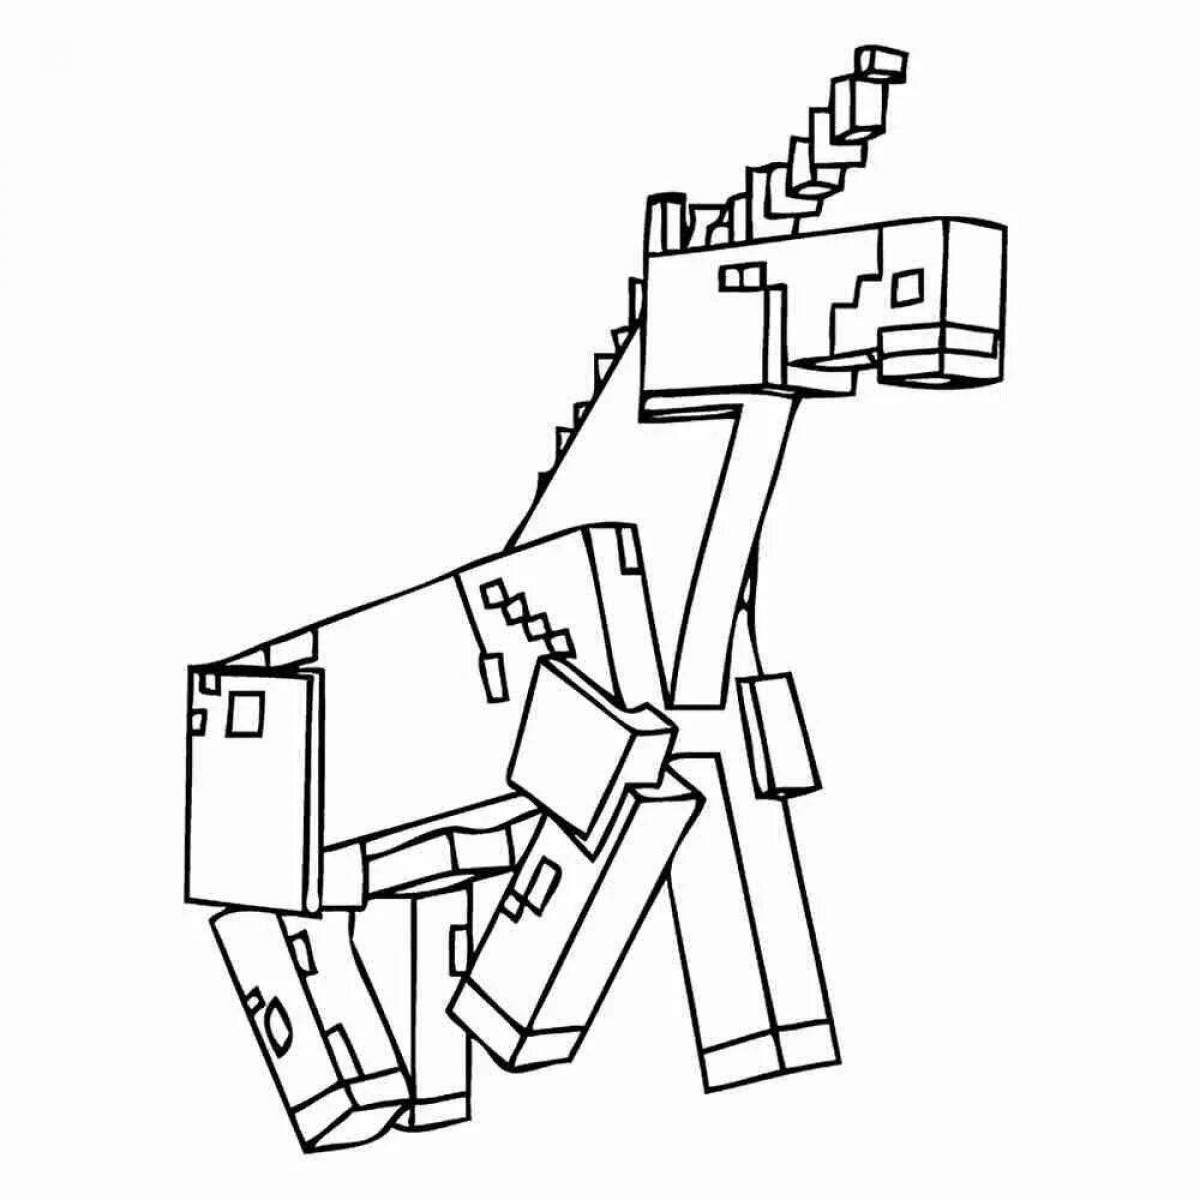 Minecraft dolphin fun coloring page